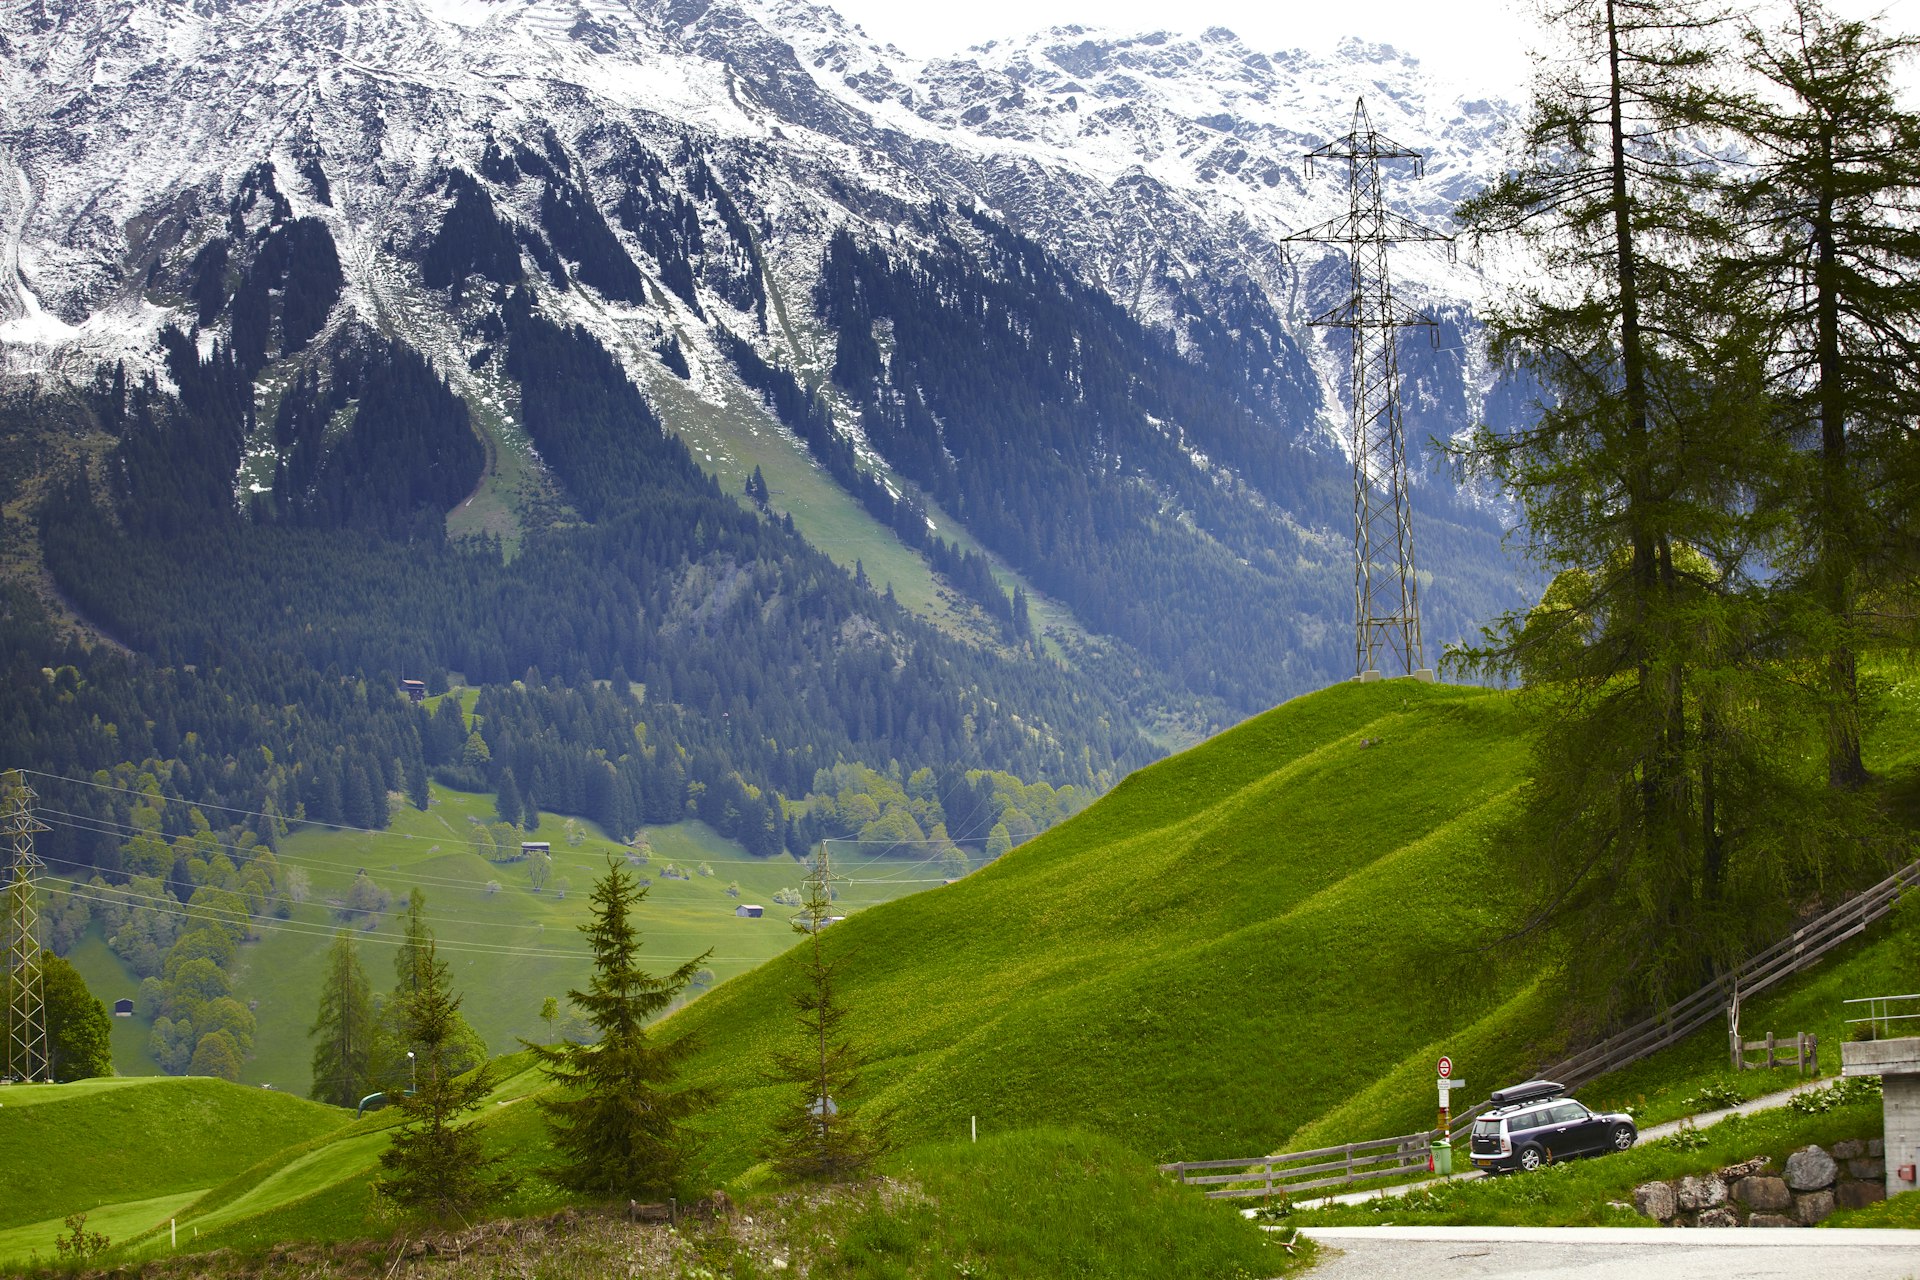 A car drives along a road through Stelvio National Park. In the background, hulking, snow-capped mountains are visible.